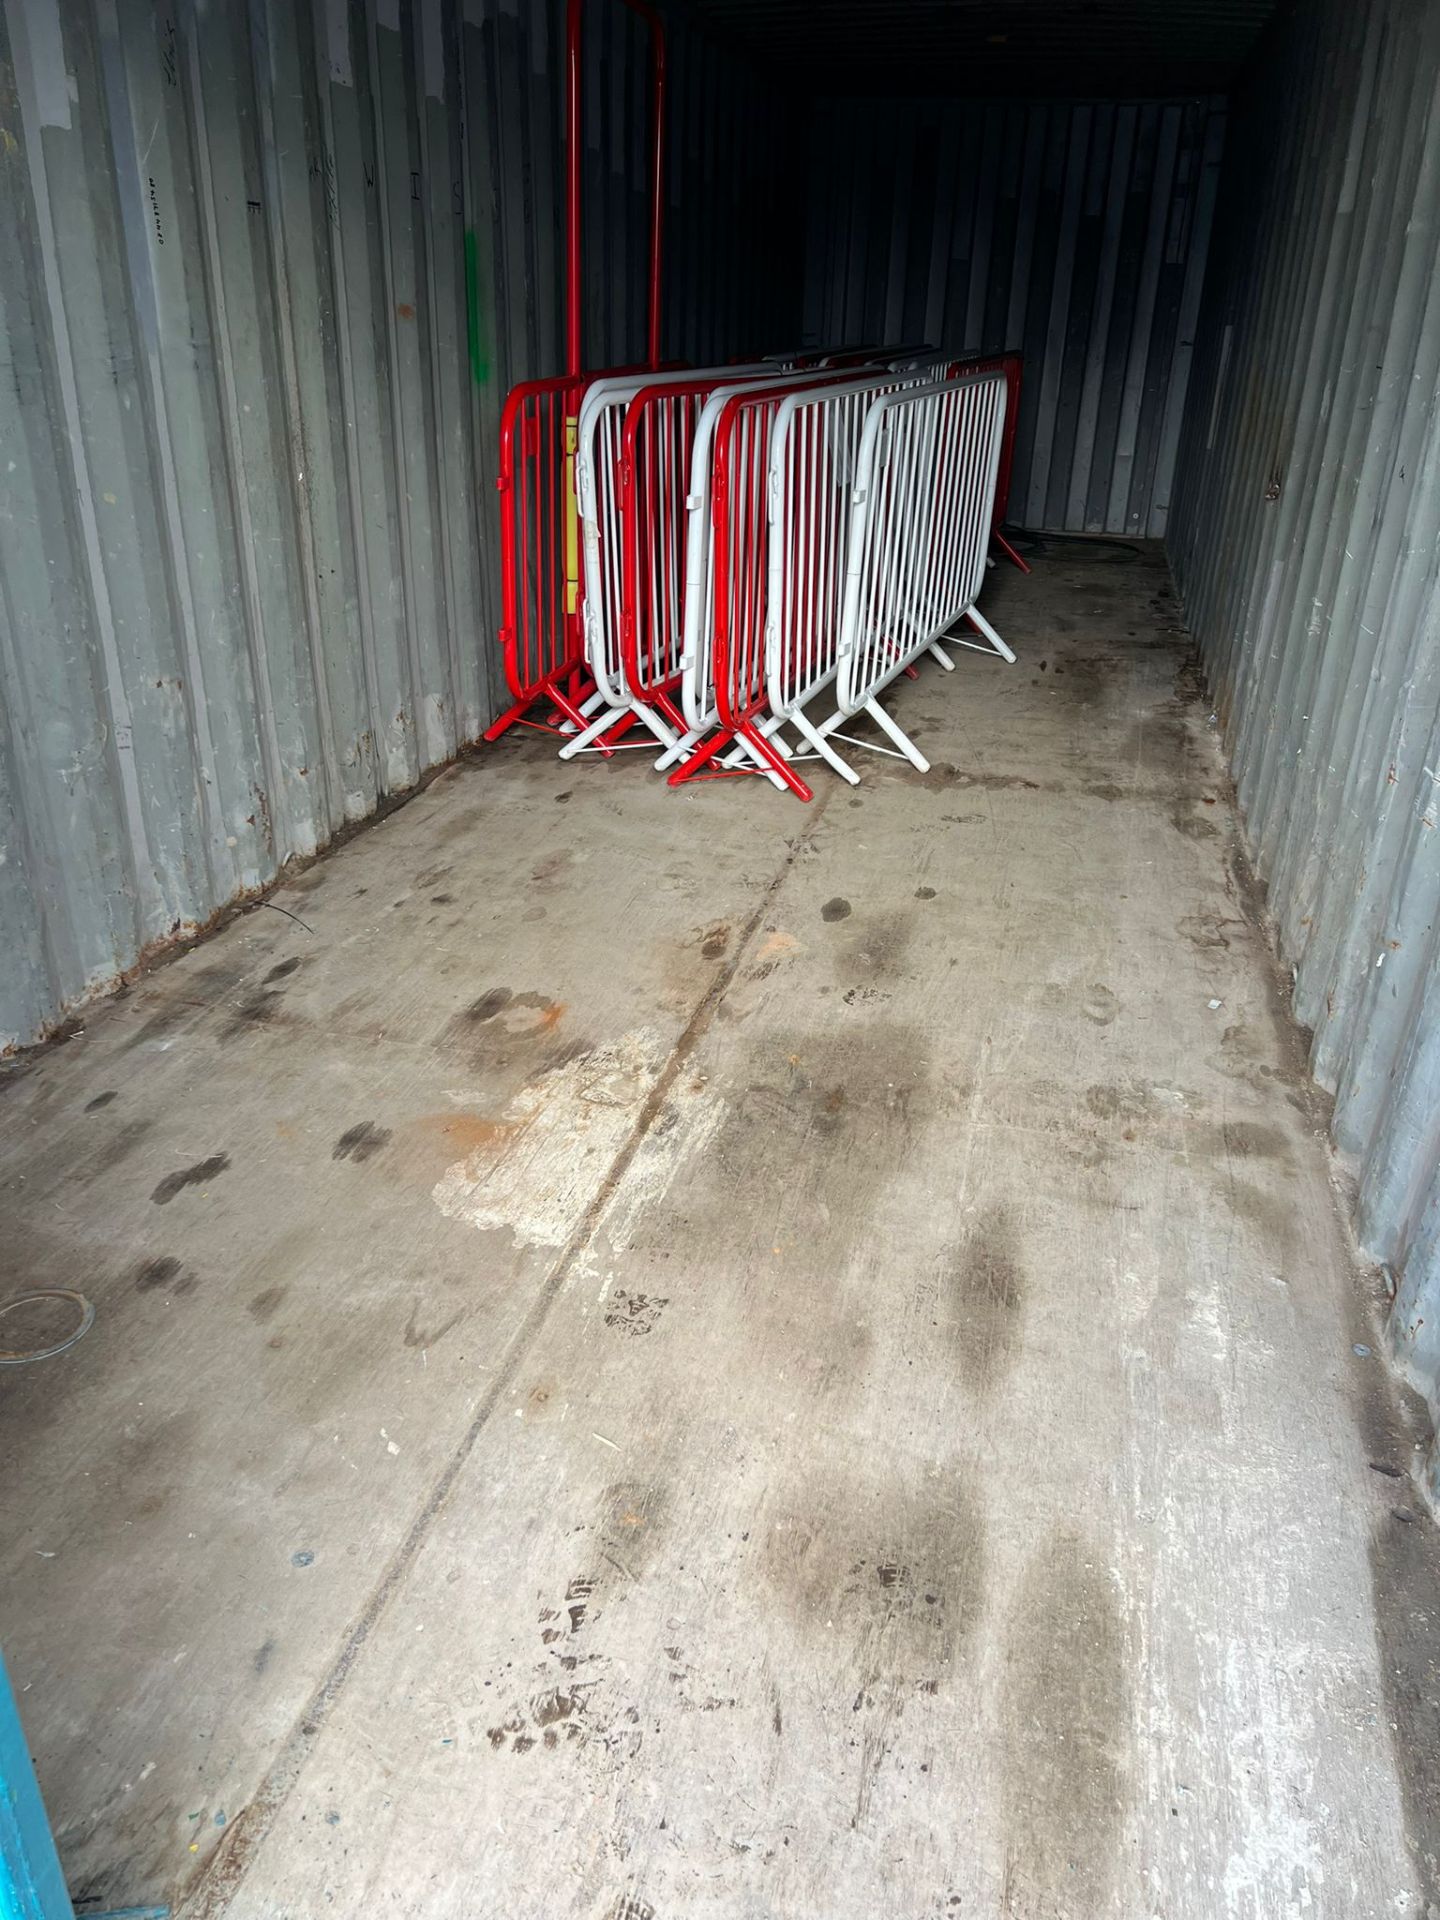 30ft x 8ft shipping container storage container - Image 6 of 7